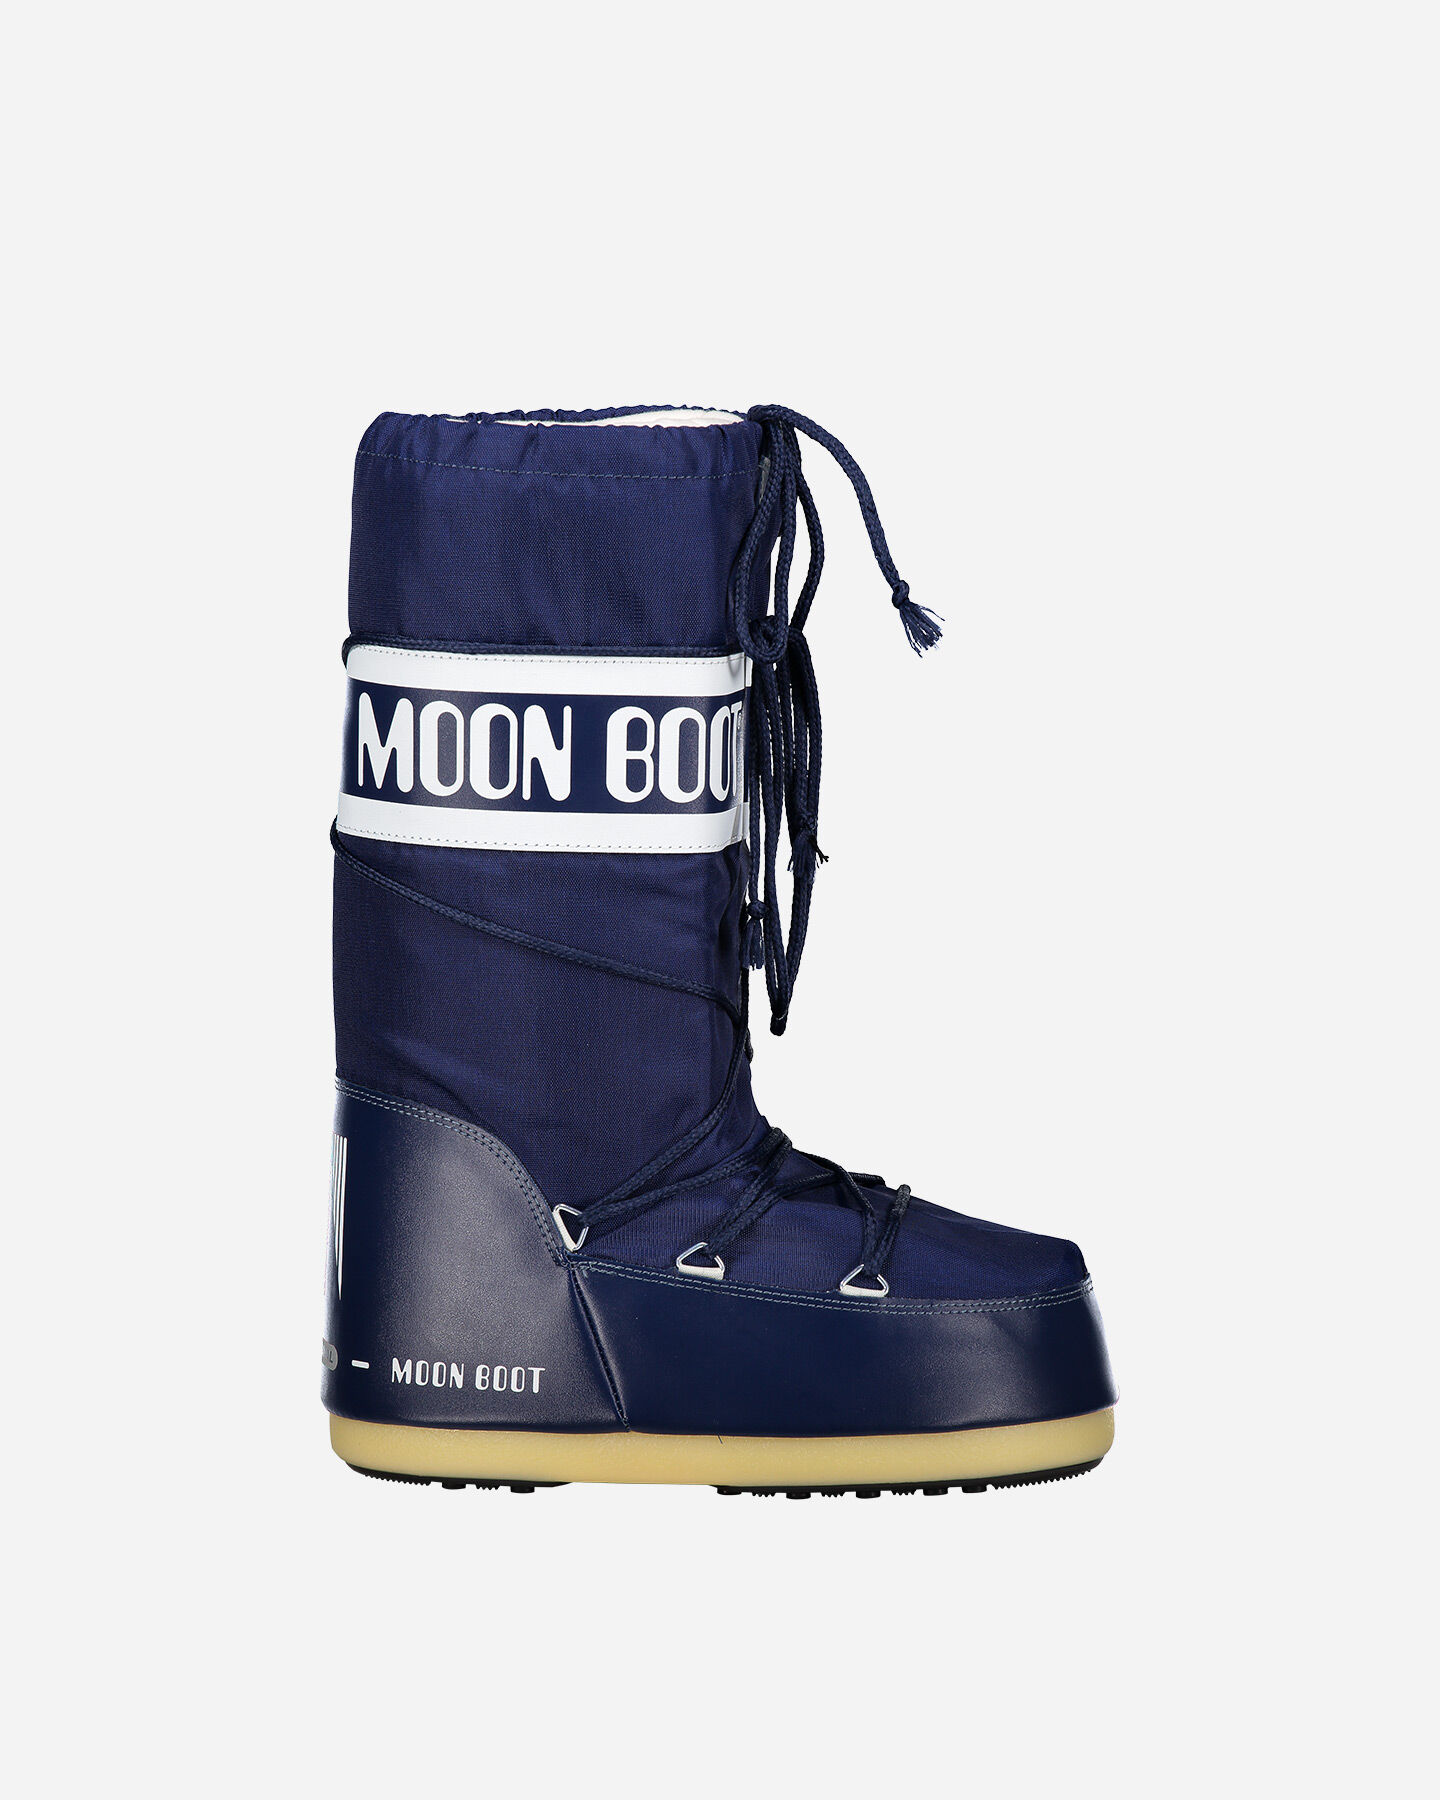  Doposci MOON BOOT MOON BOOT M S0595667|660|2730 scatto 0